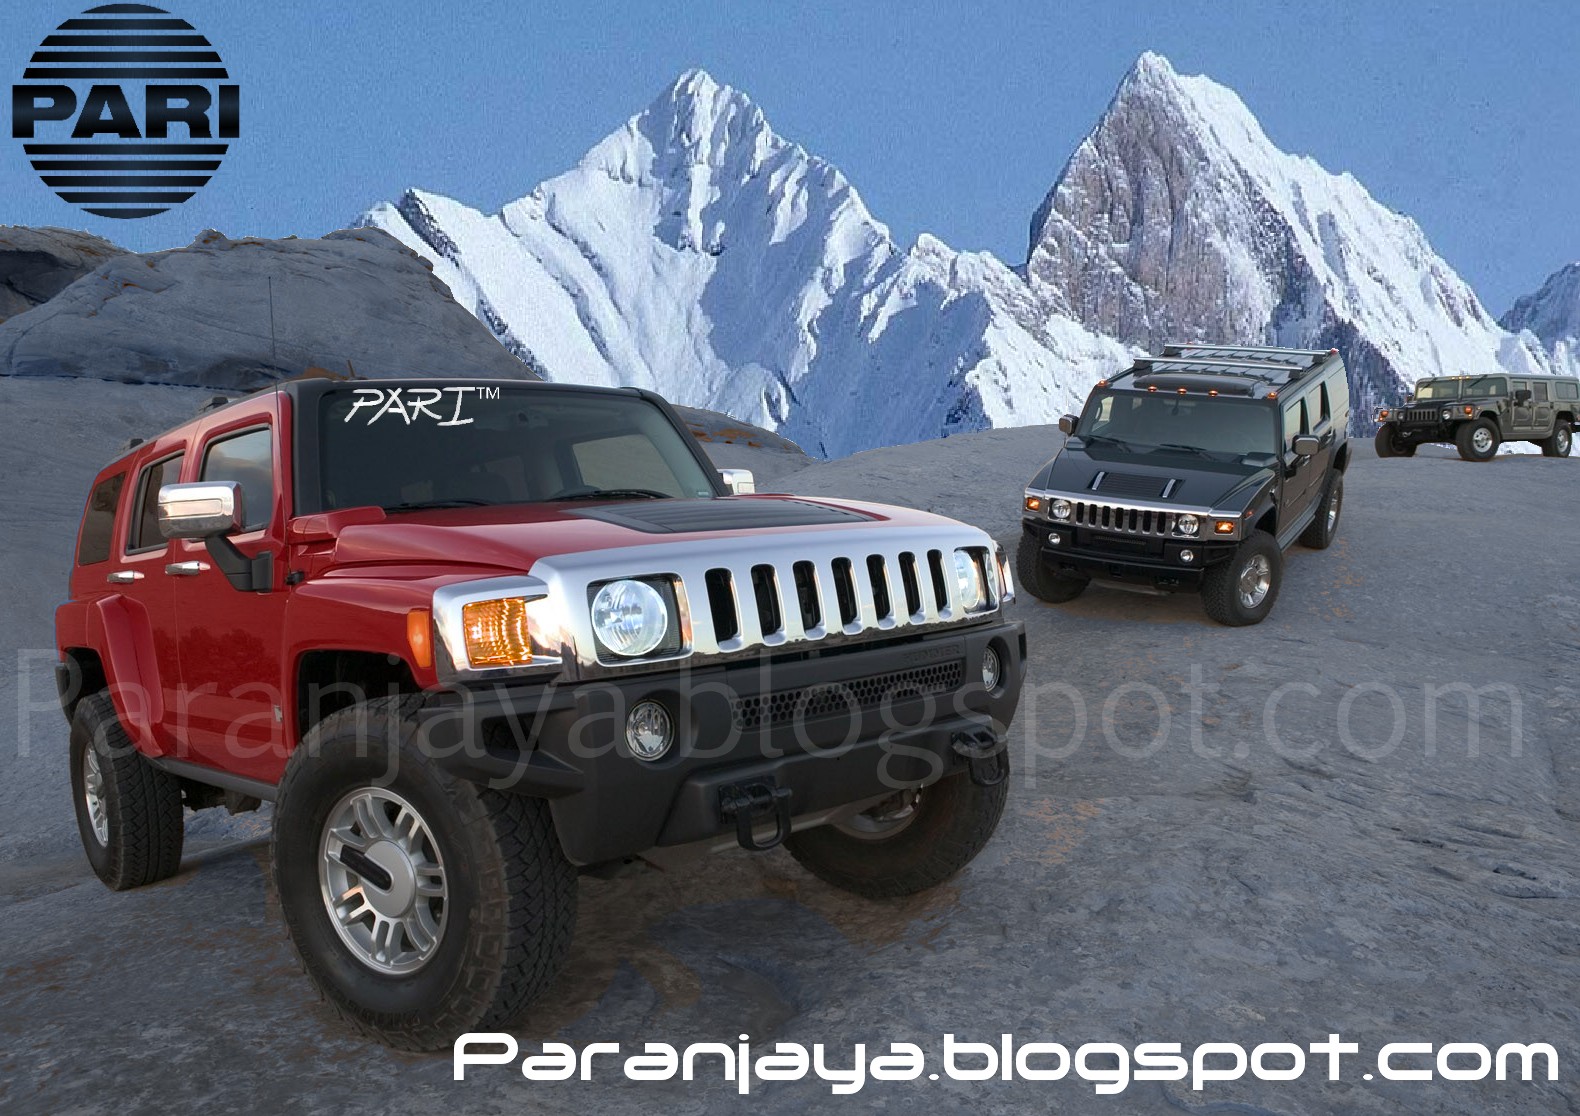 hummer h3 the smallest model from the hummer stable has 3 7 liter ...